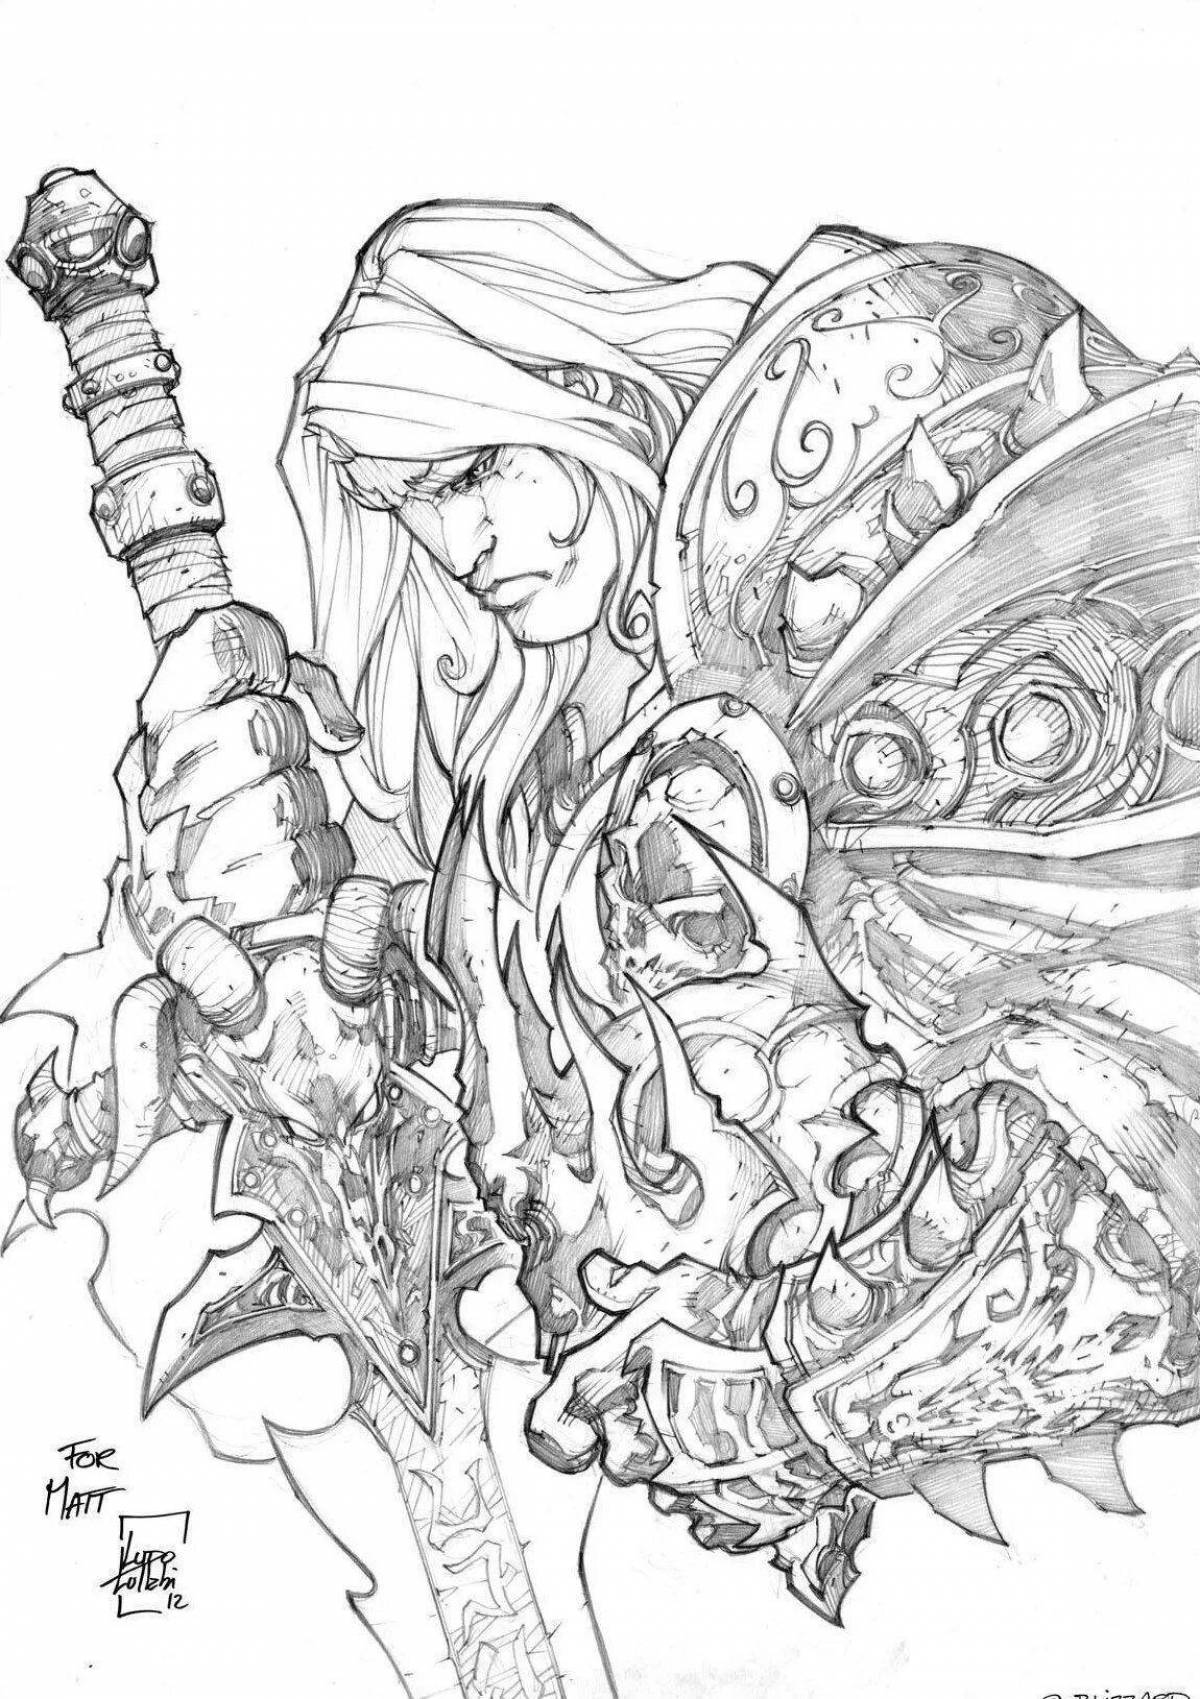 Grand world of warcraft coloring book